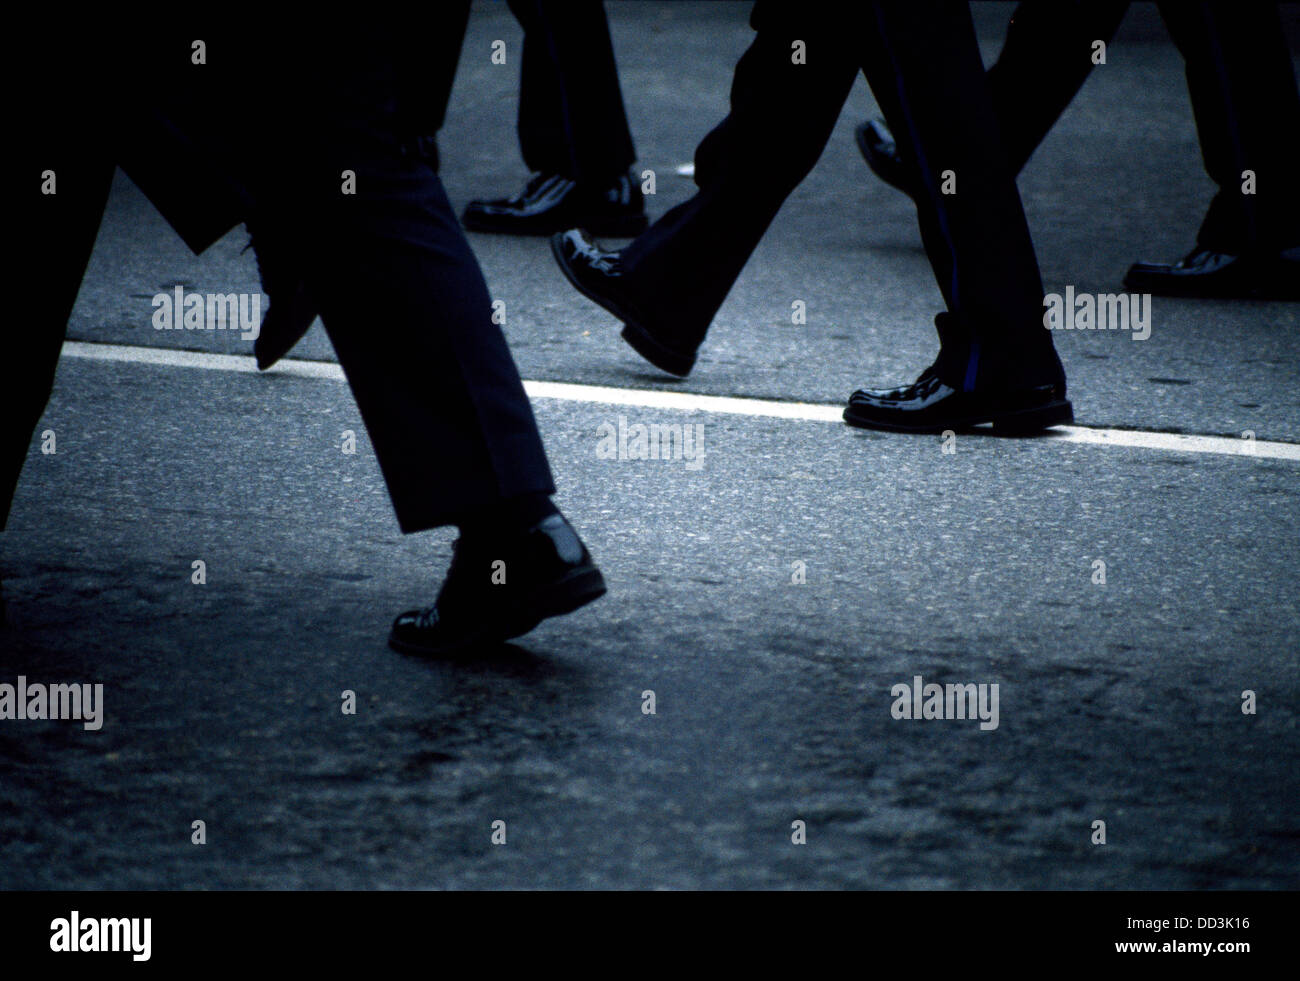 Many black colored legs and shoes marching on a street with a white line. Stock Photo